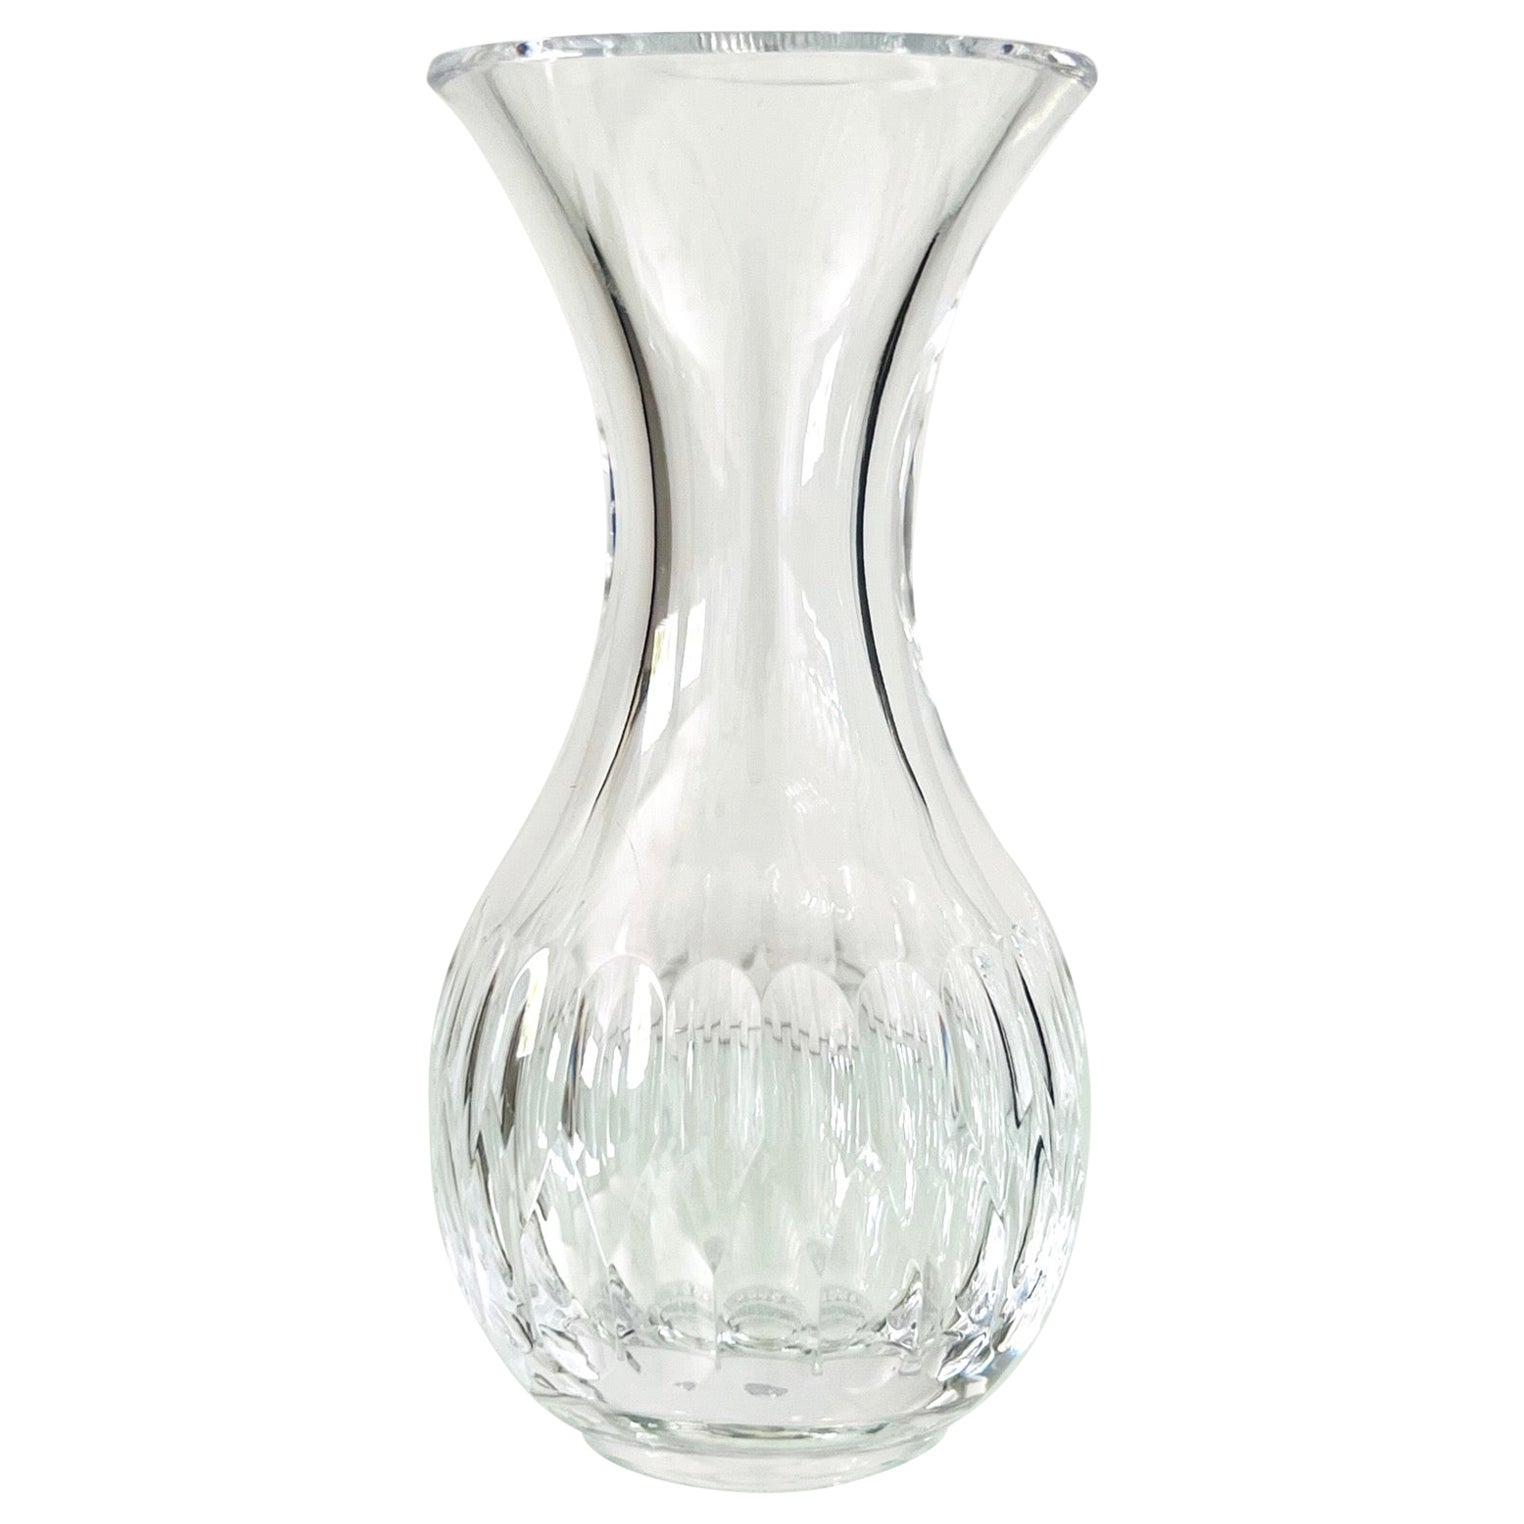 Vintage Waterford Crystal Open Carafe with Faceted Design, C. 1985